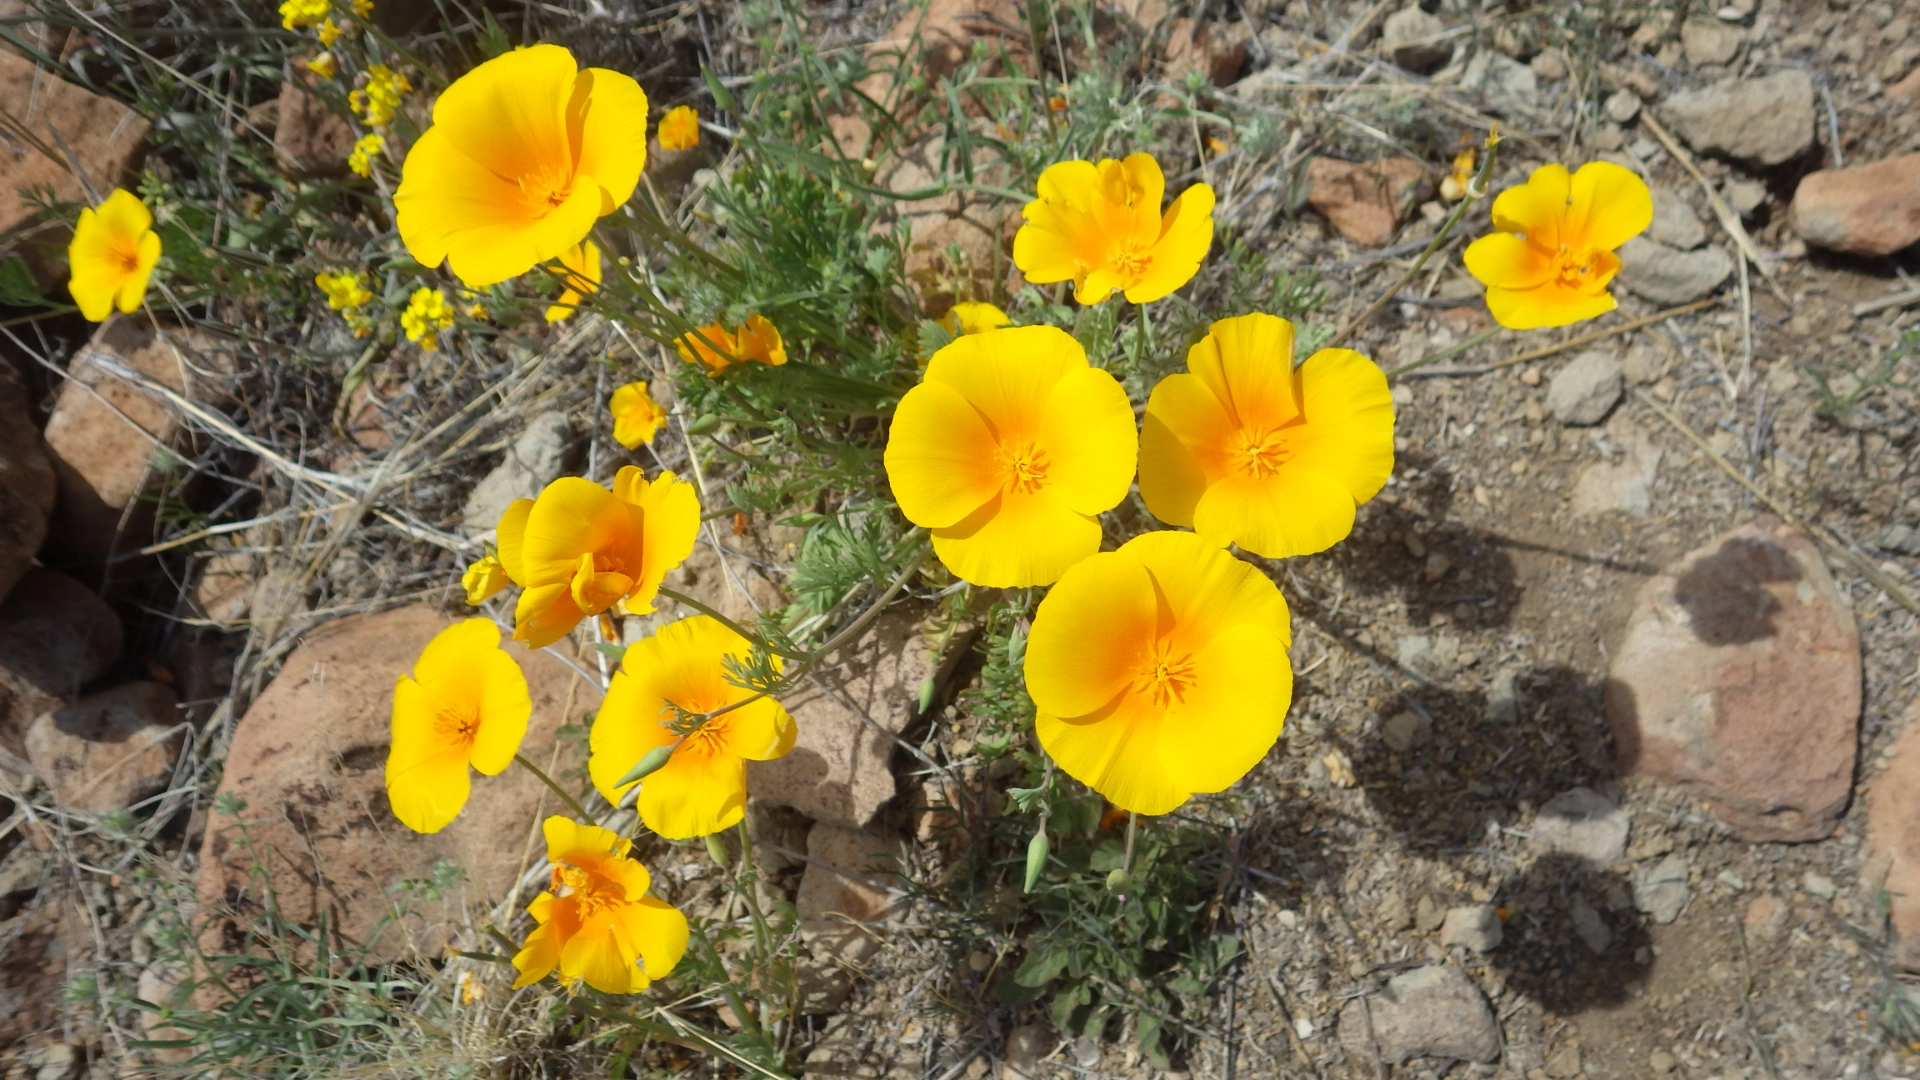 Mexican poppies